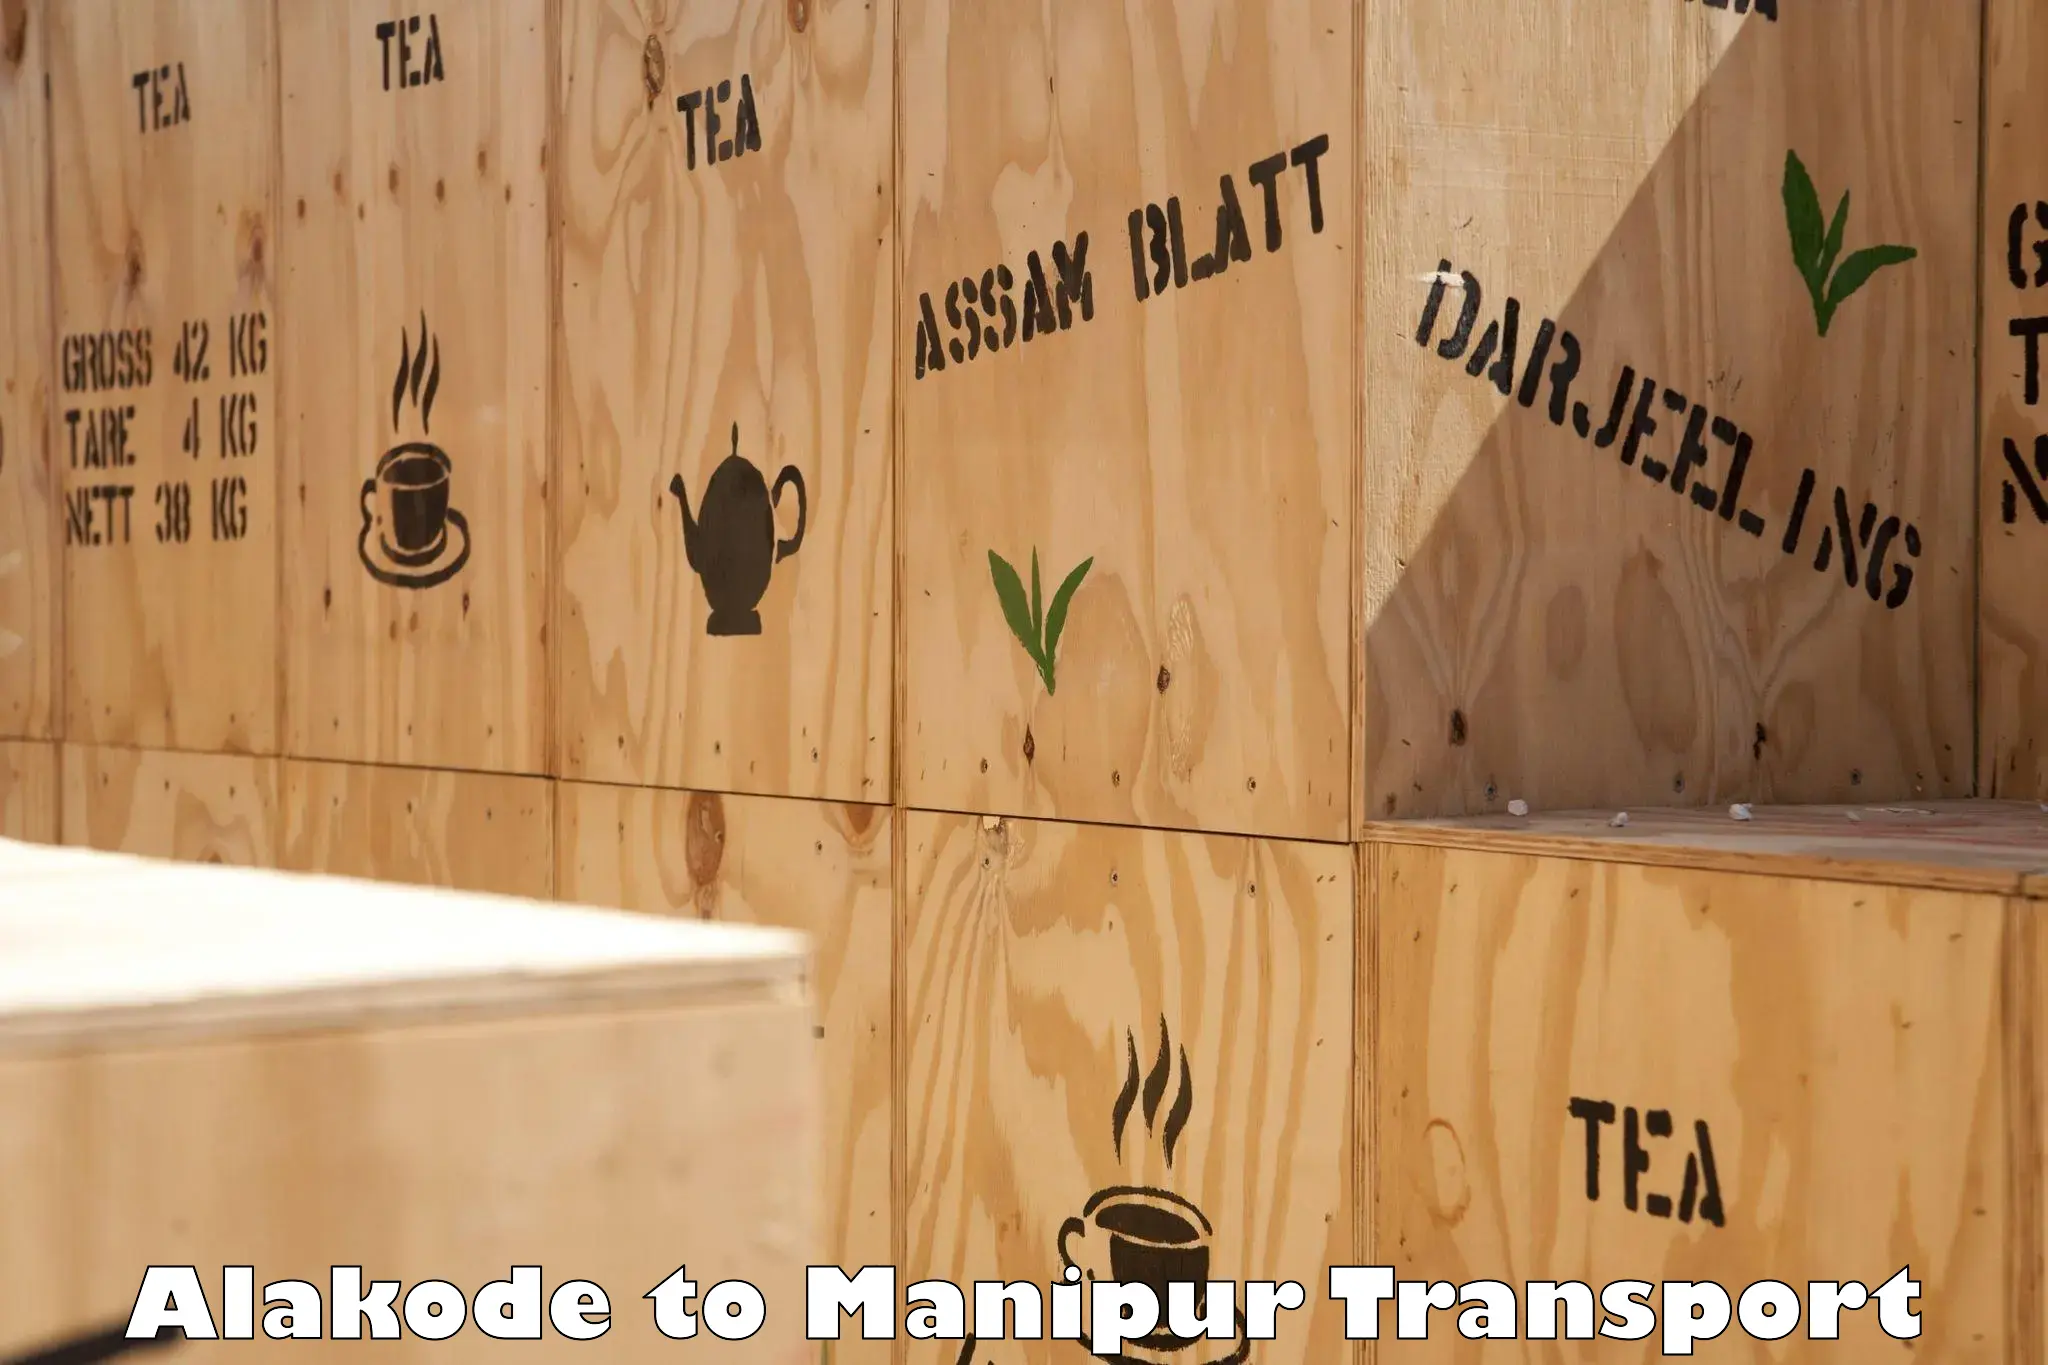 Truck transport companies in India Alakode to Manipur